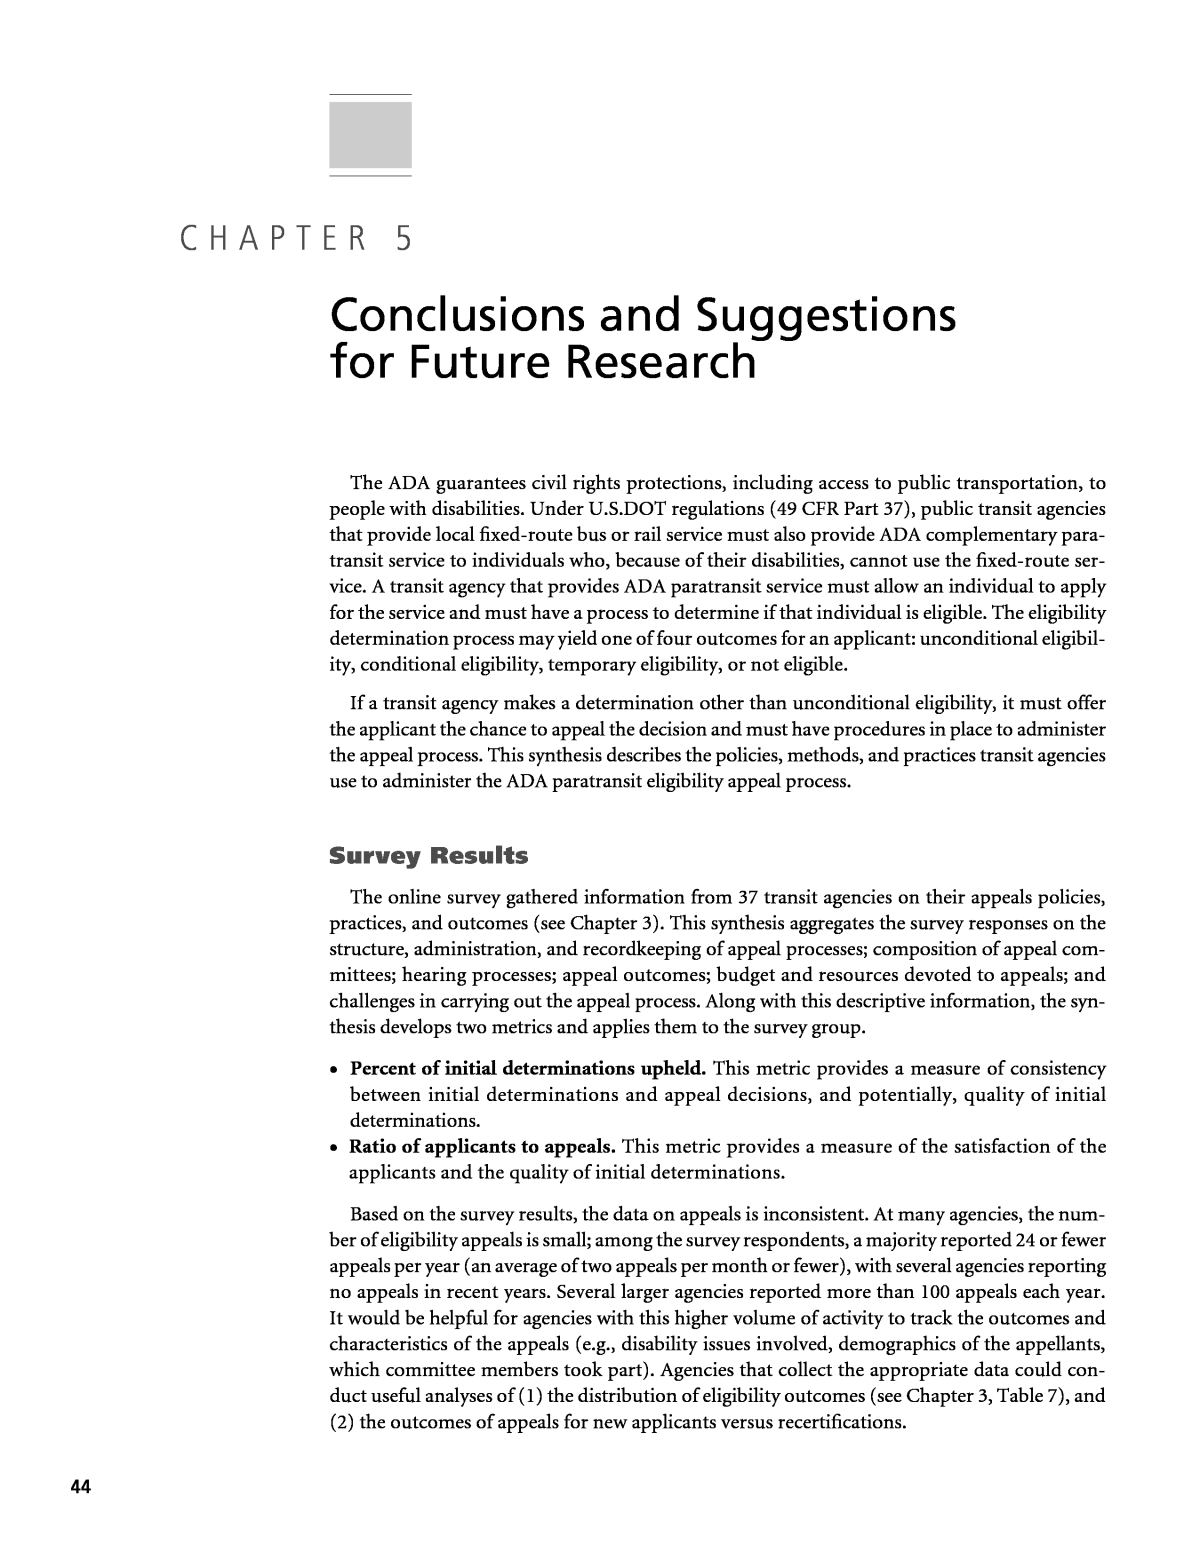 thesis recommendation for future researchers